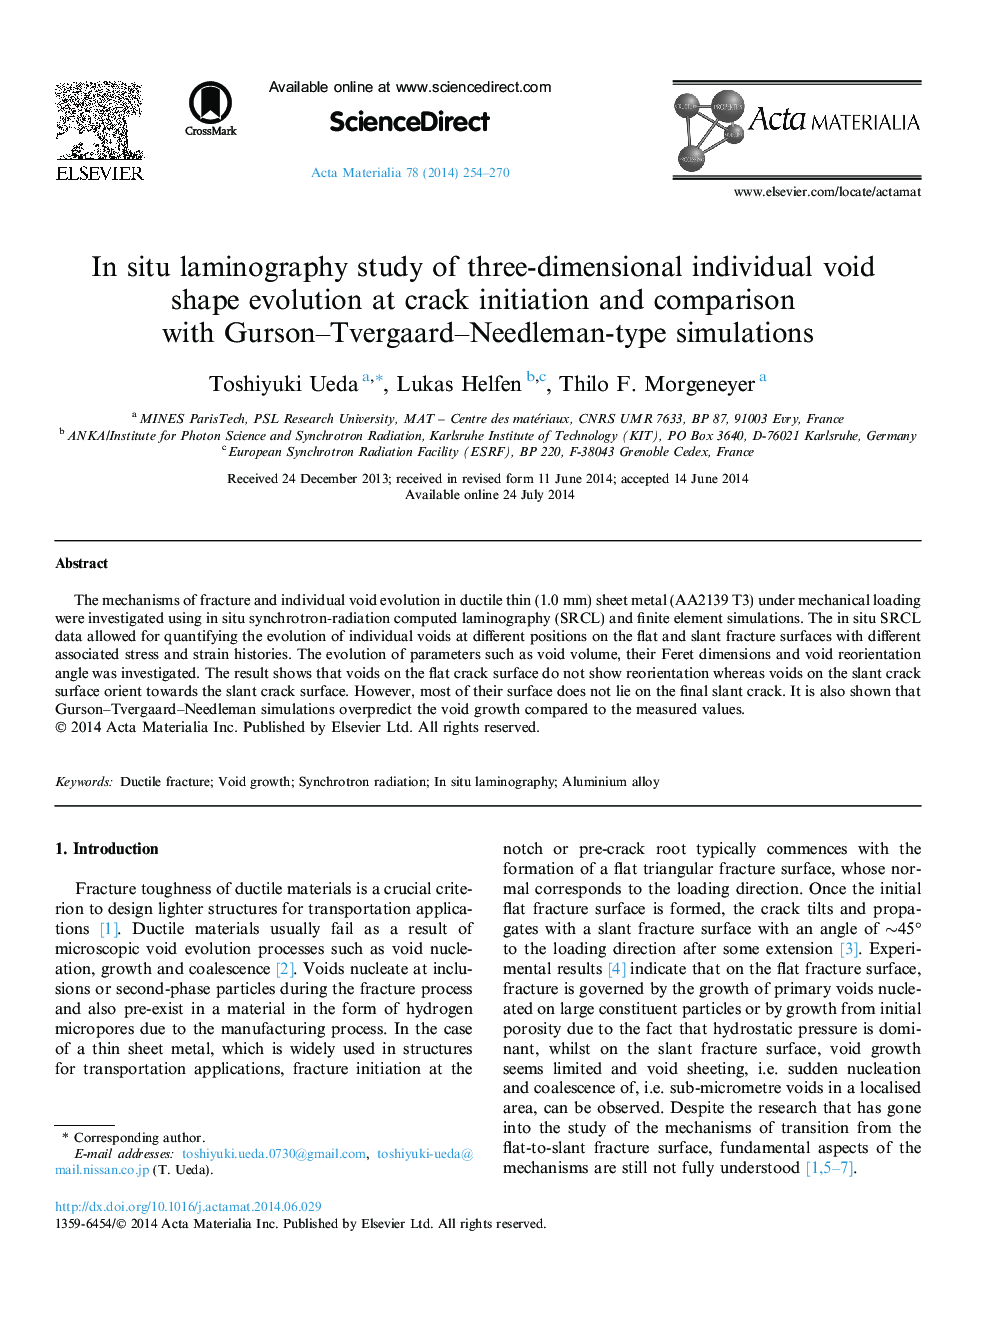 In situ laminography study of three-dimensional individual void shape evolution at crack initiation and comparison with Gurson–Tvergaard–Needleman-type simulations